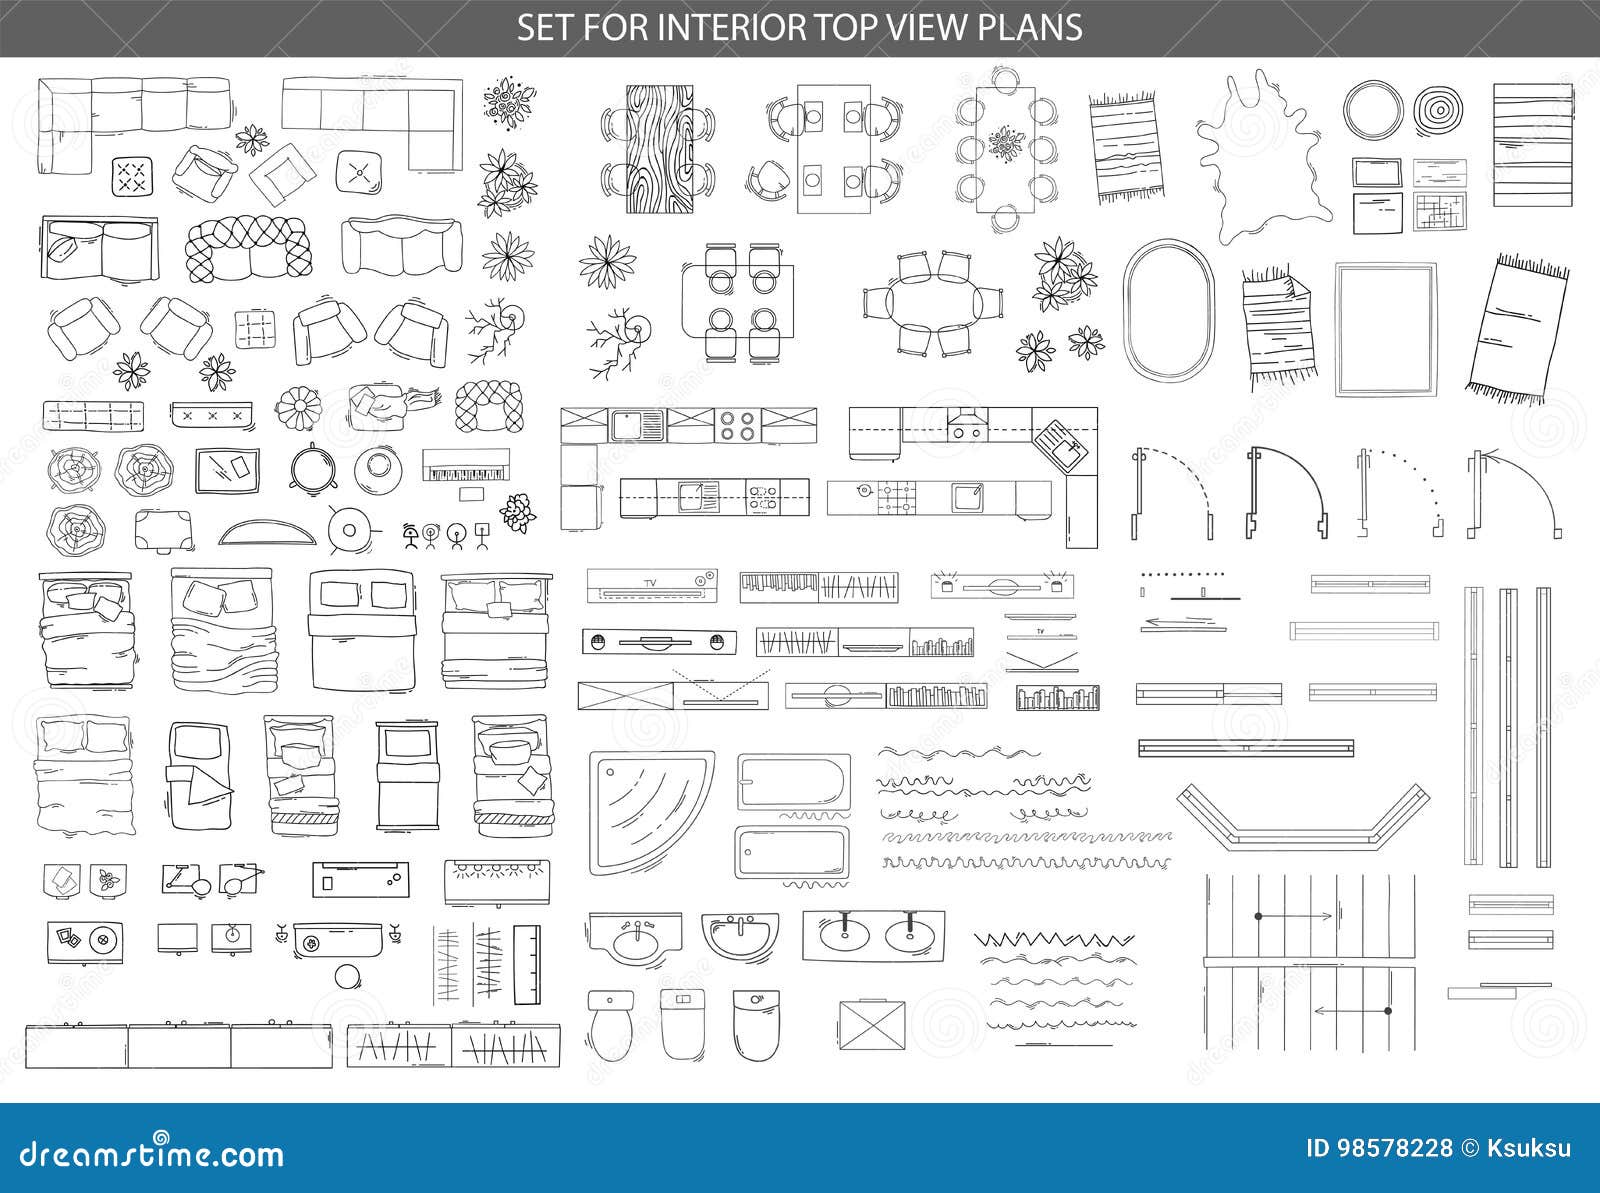 big set of icons for interior top view plans